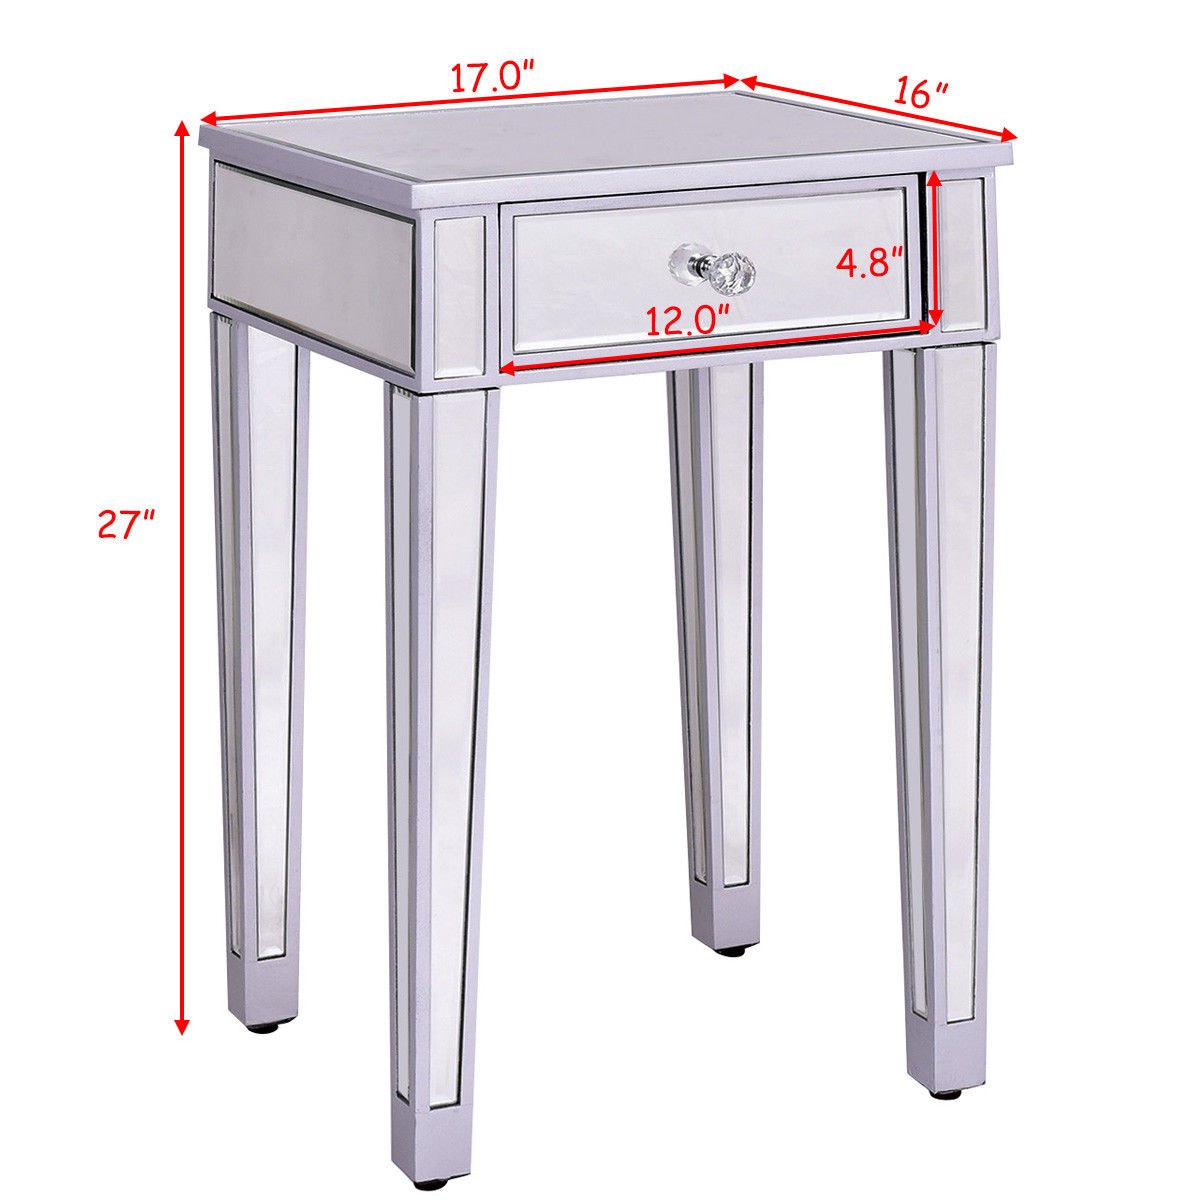 way mirrored accent table nightstand end bedside with mirror storage cabinet drawer triangle drop leaf chairs clear acrylic furniture windham target lazy susan old kitchen tables